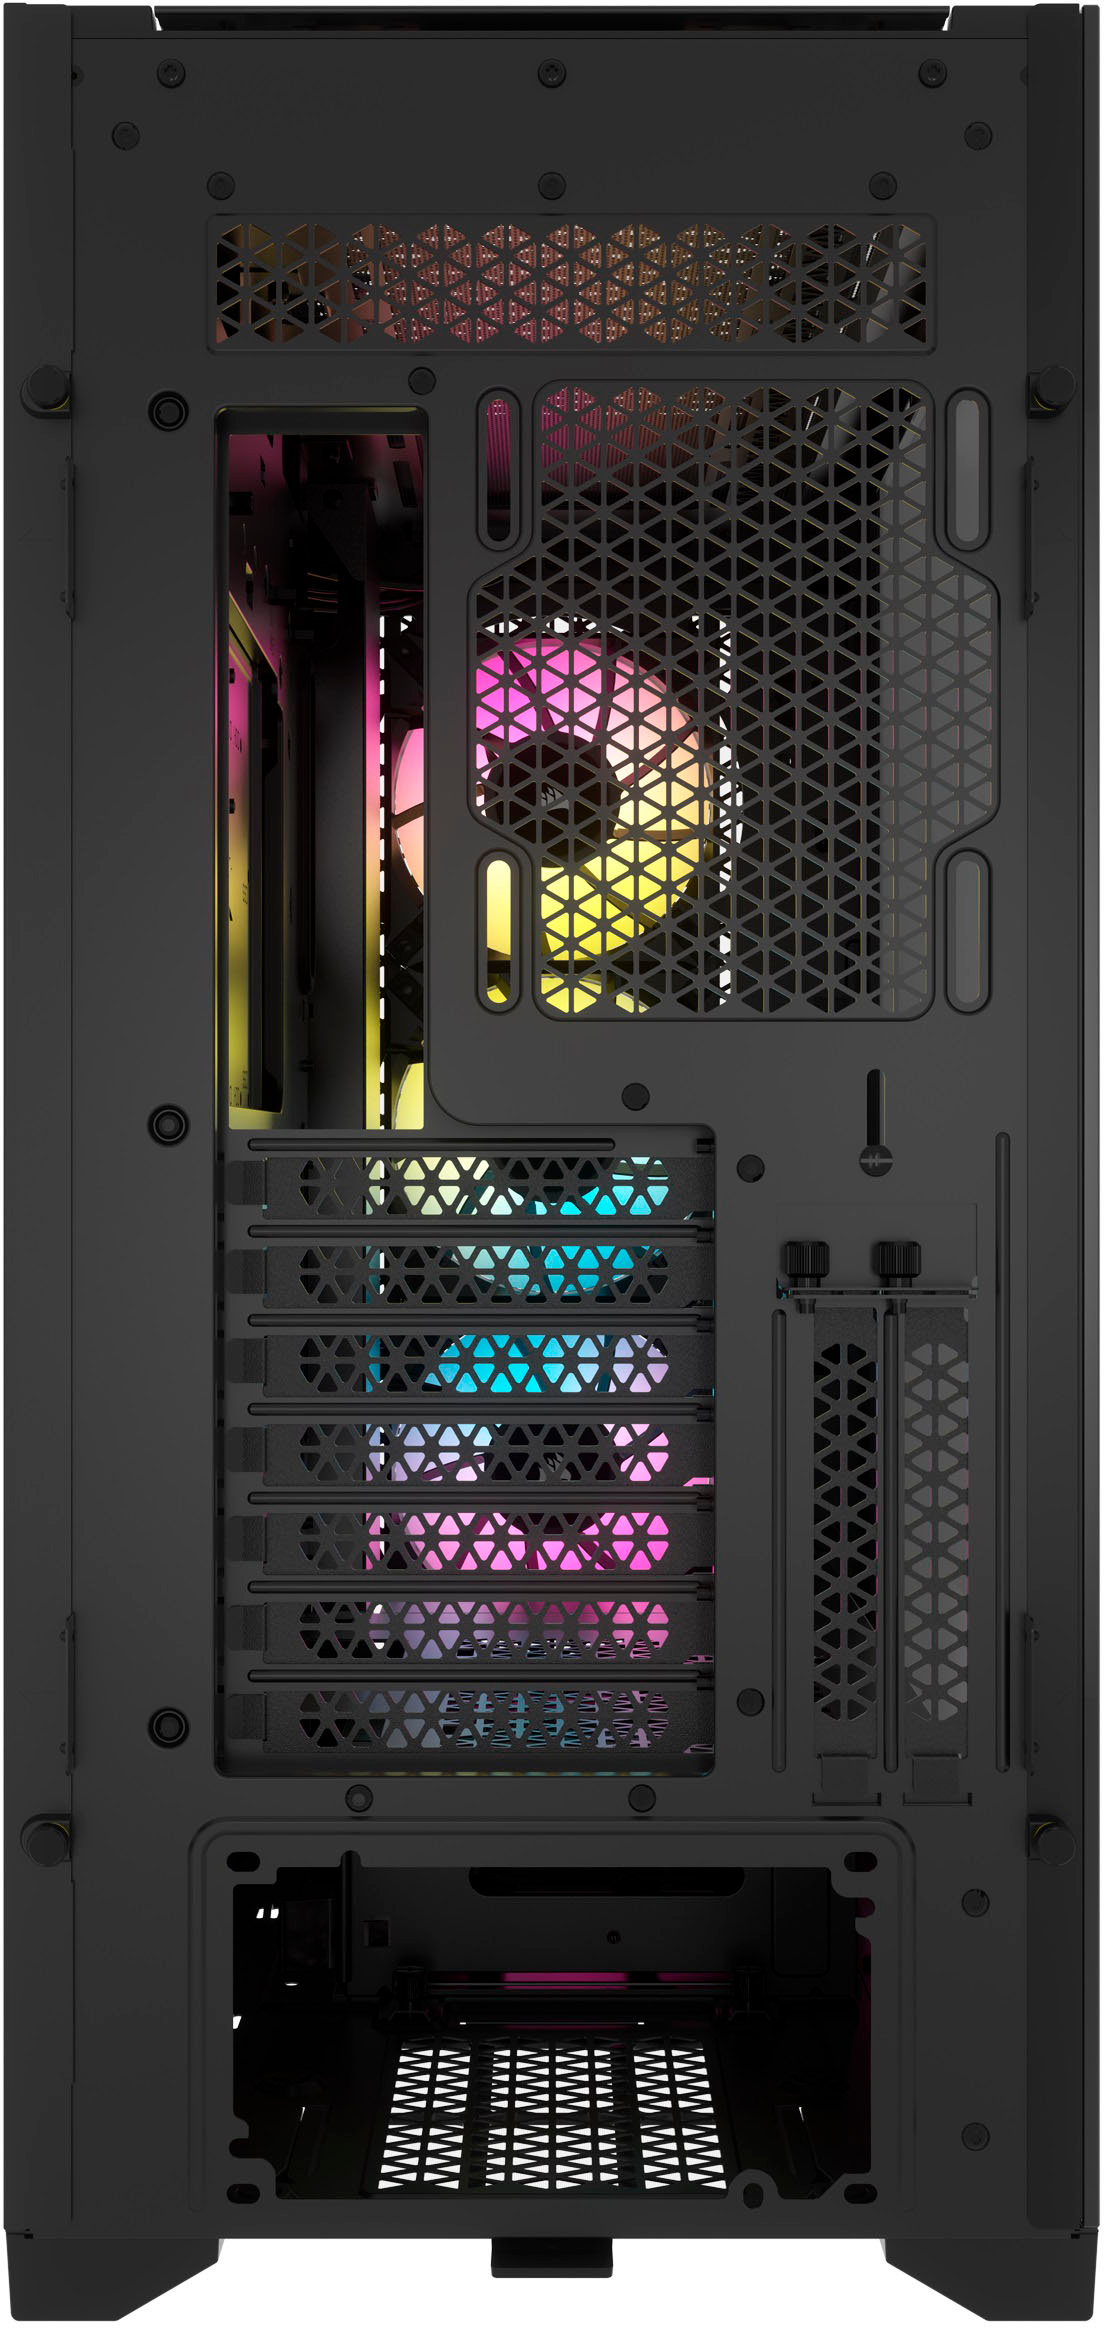 Our dream machine case, Corsair's 5000D, is down to just $99 right now